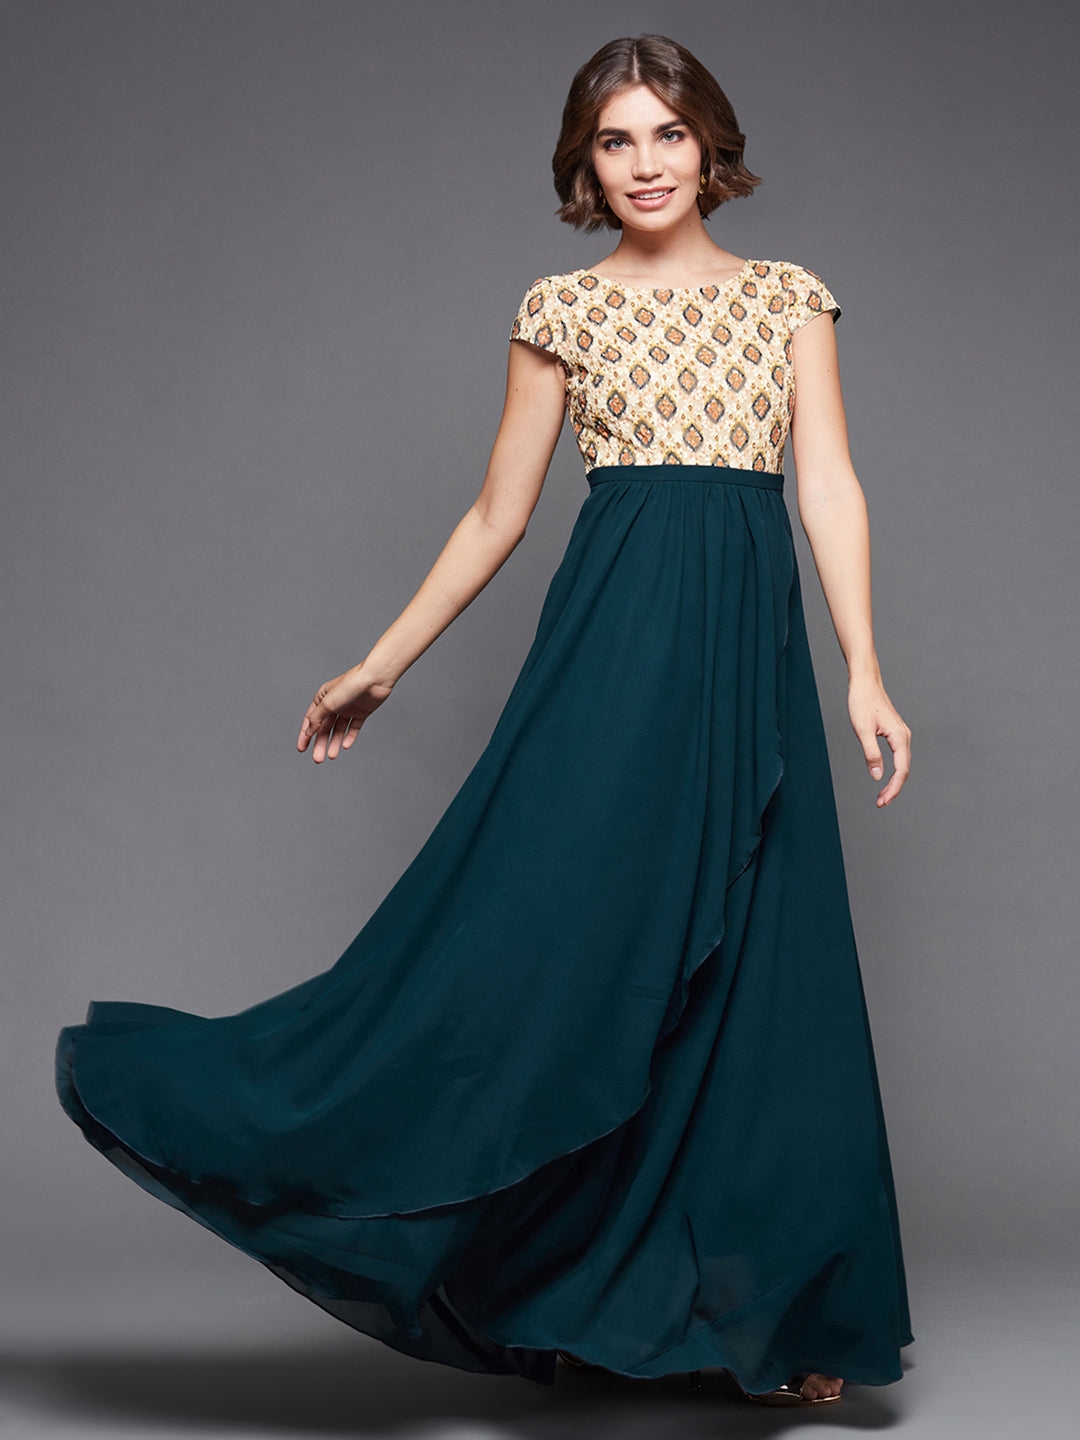 Multicolored-Base-Teal Georgette Round Neck Cap Sleeve Floral Layered Maxi Dress